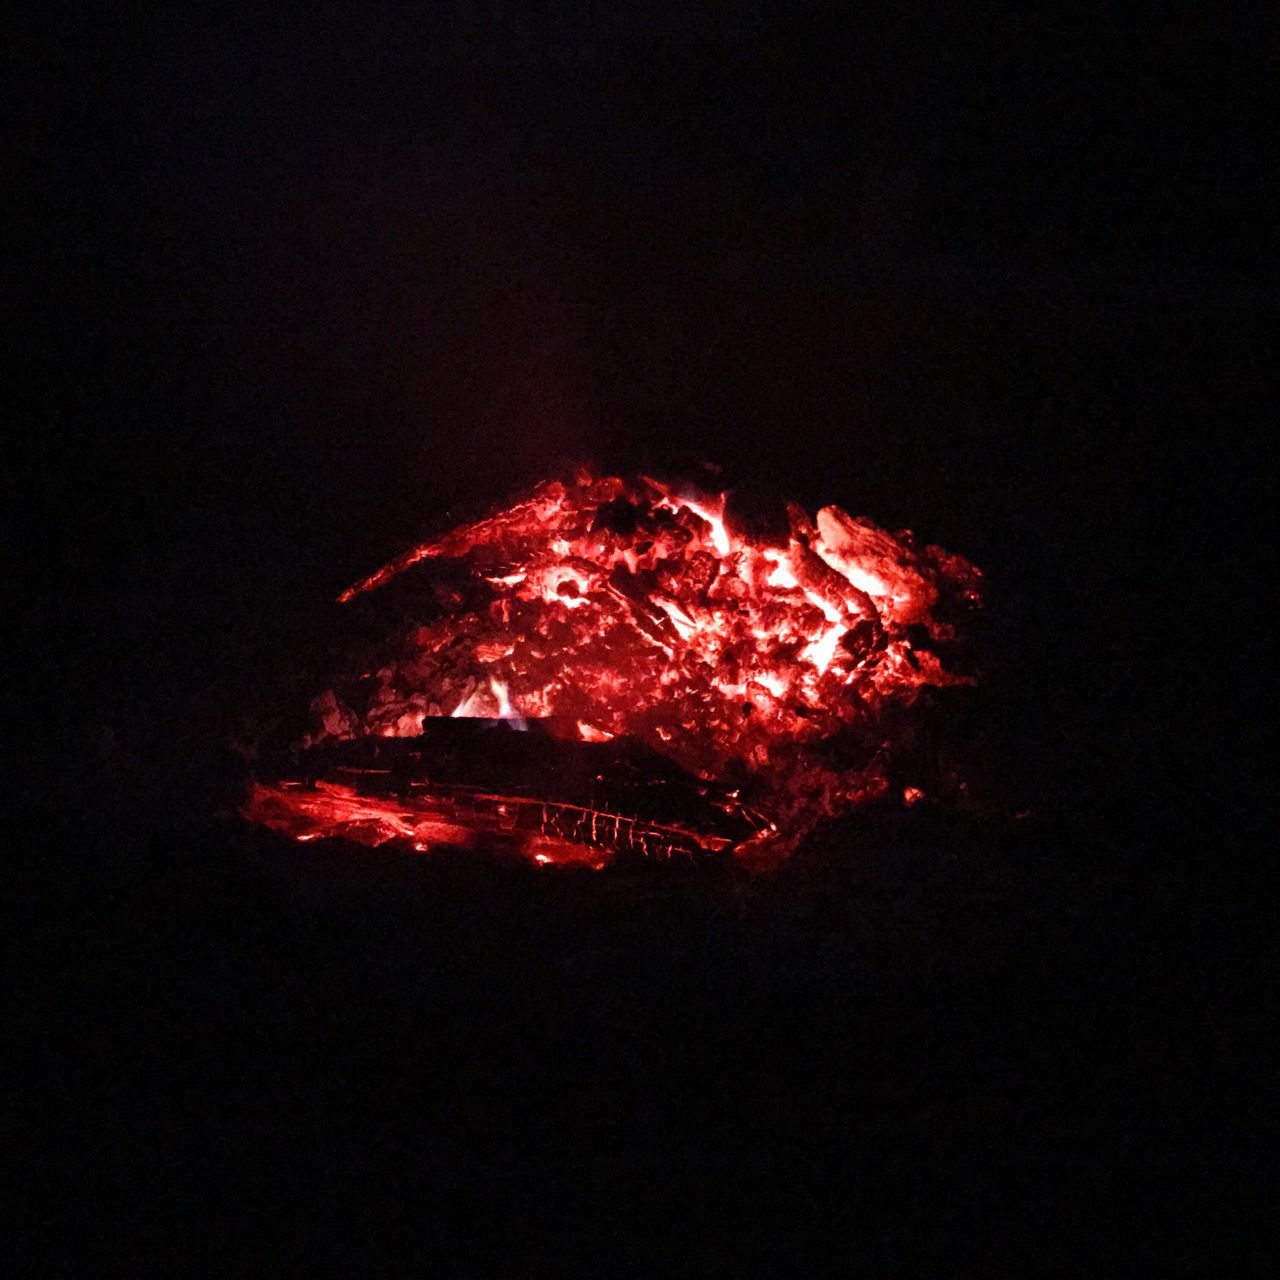 night, copy space, burning, no people, red, outdoors, lava, flame, bonfire, close-up, sky